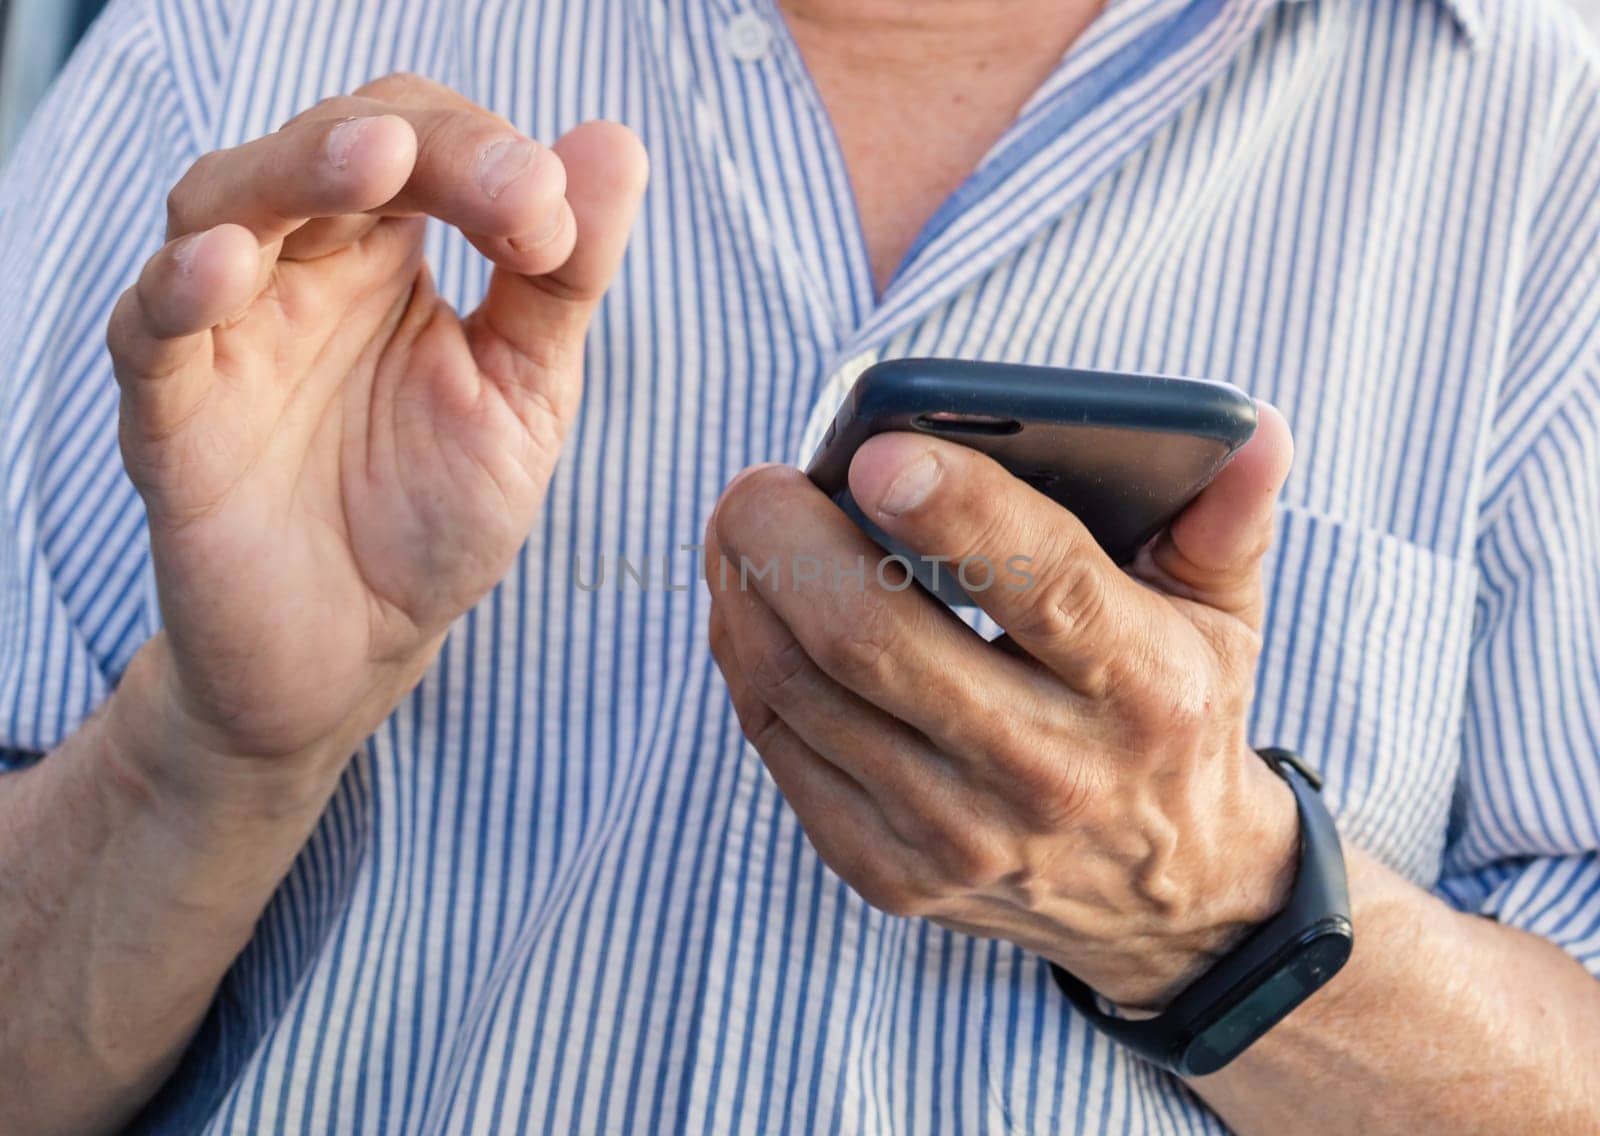 An elderly man holds a mobile phone in his hands with nibbled nails. Close-up image of an elderly man's hands